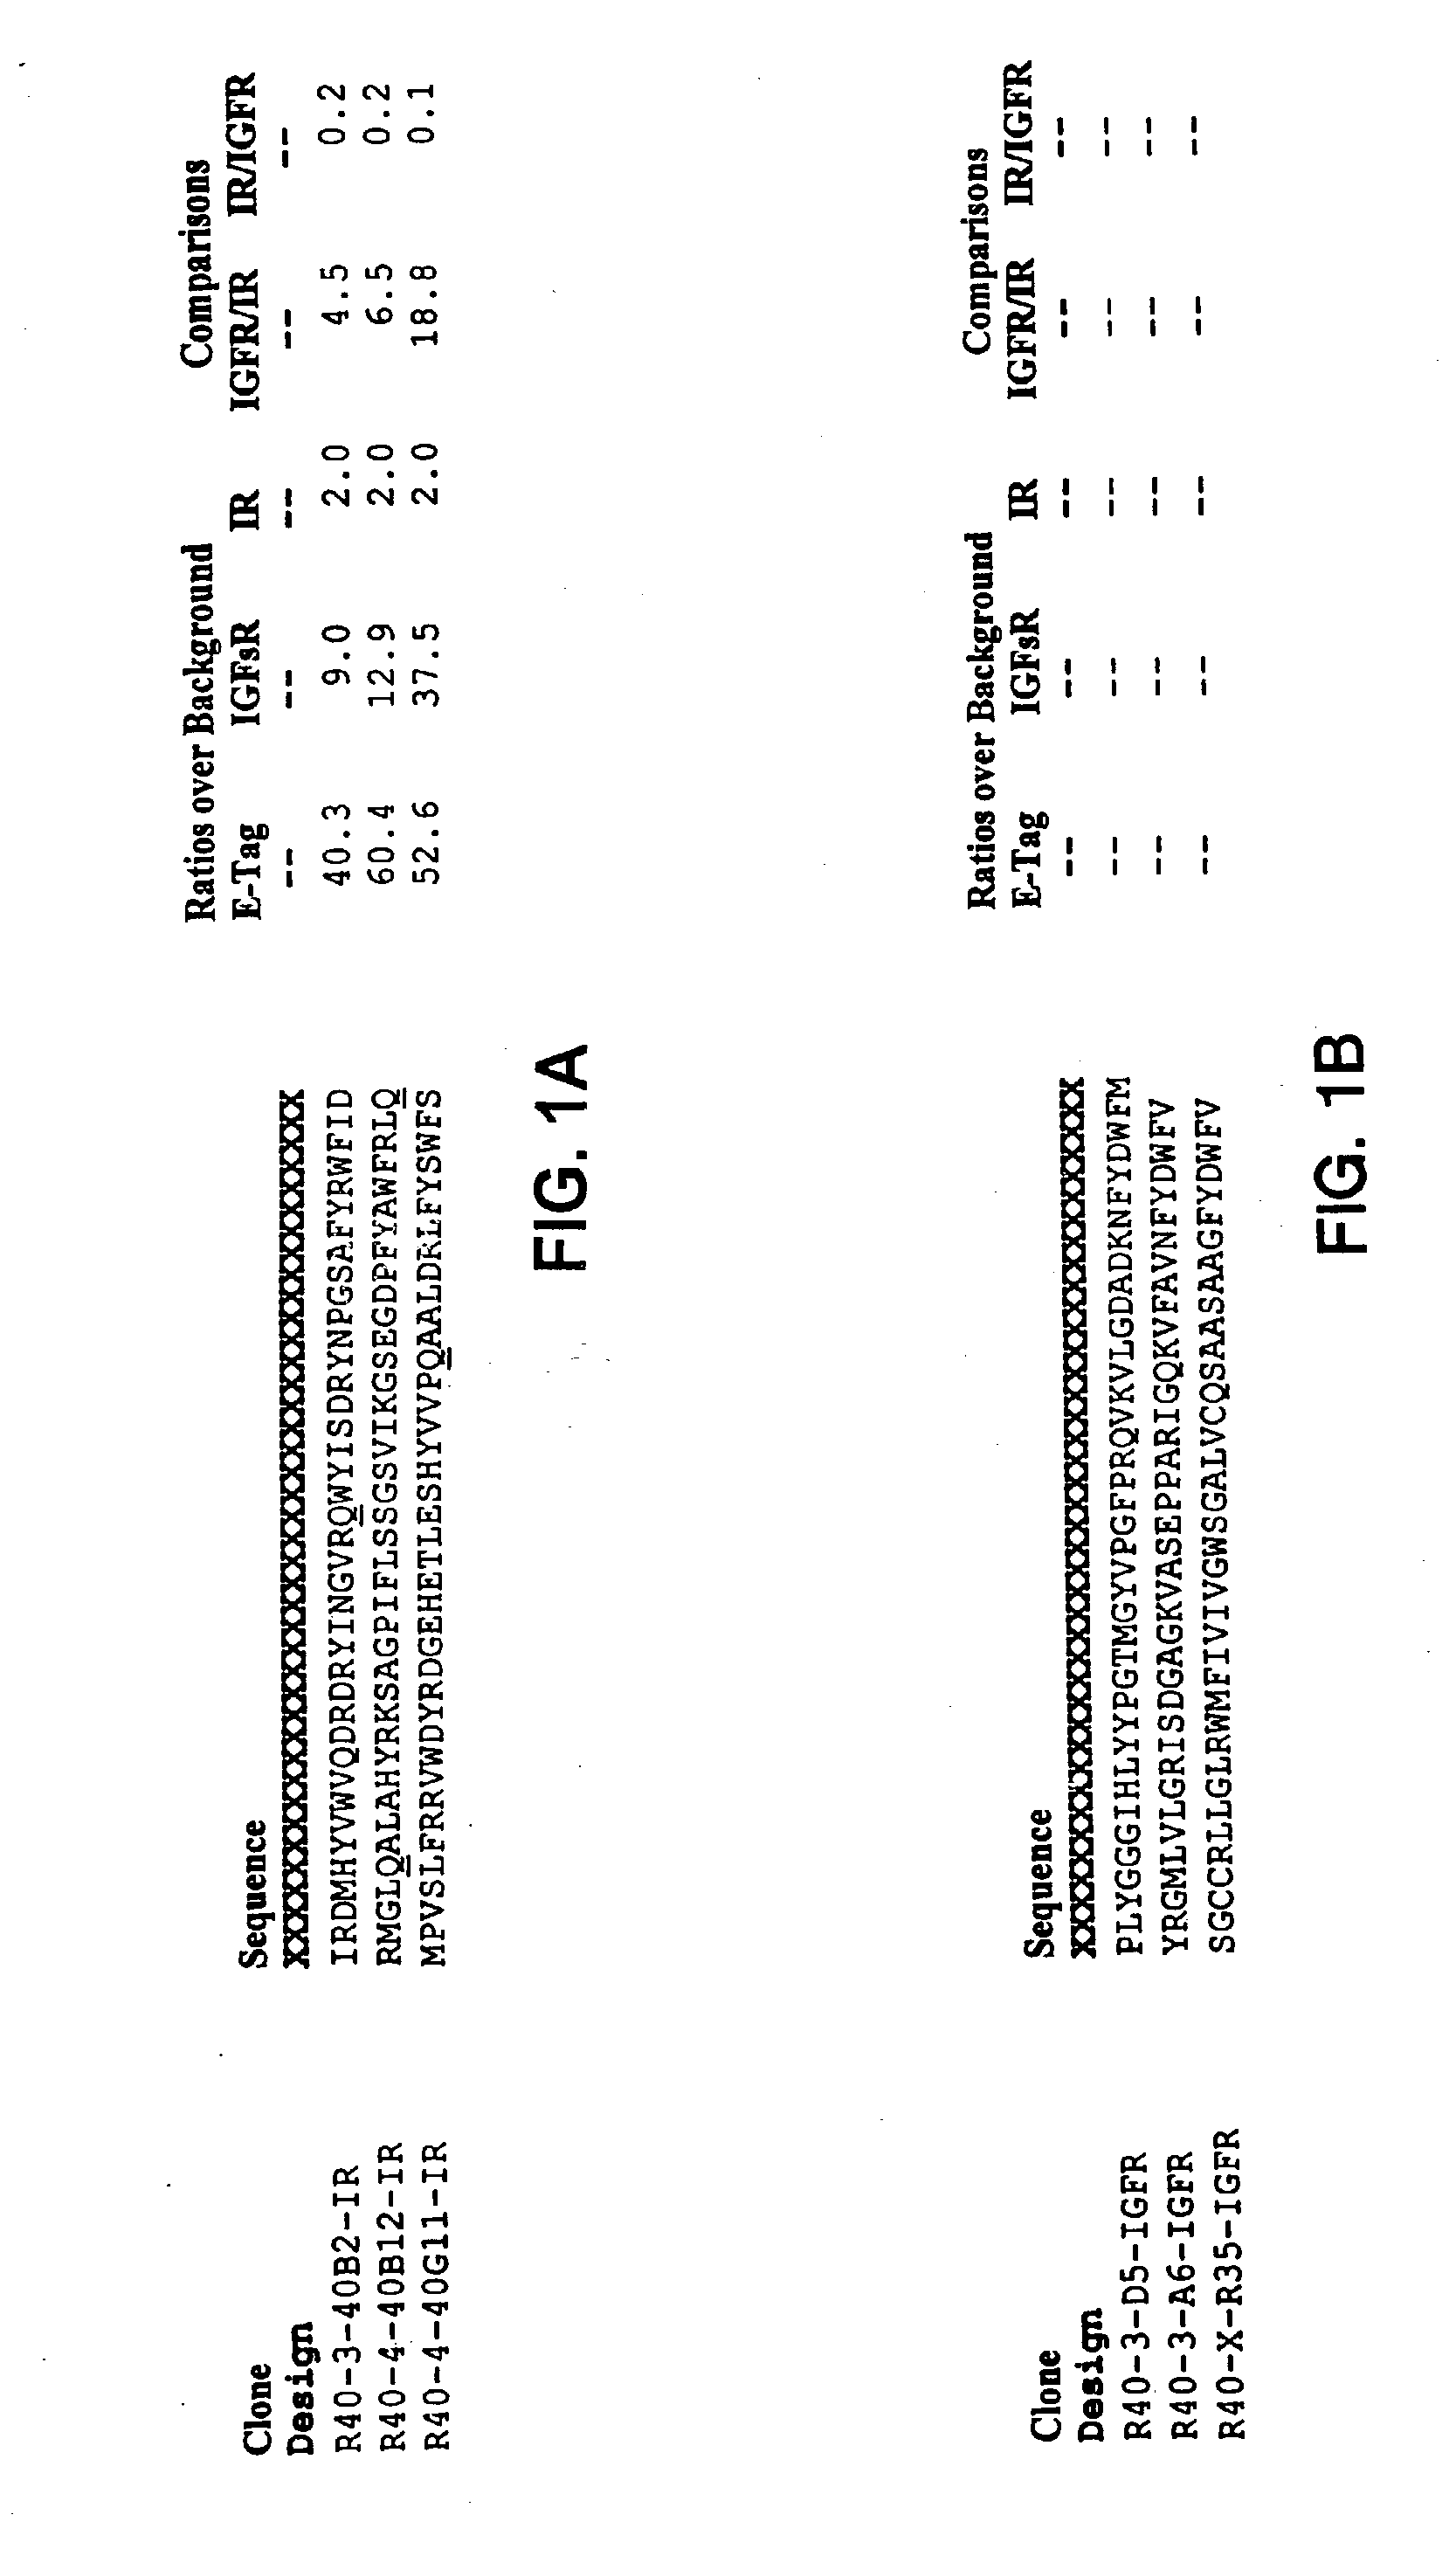 Insulin and IGF-1 receptor agonists and antagonists